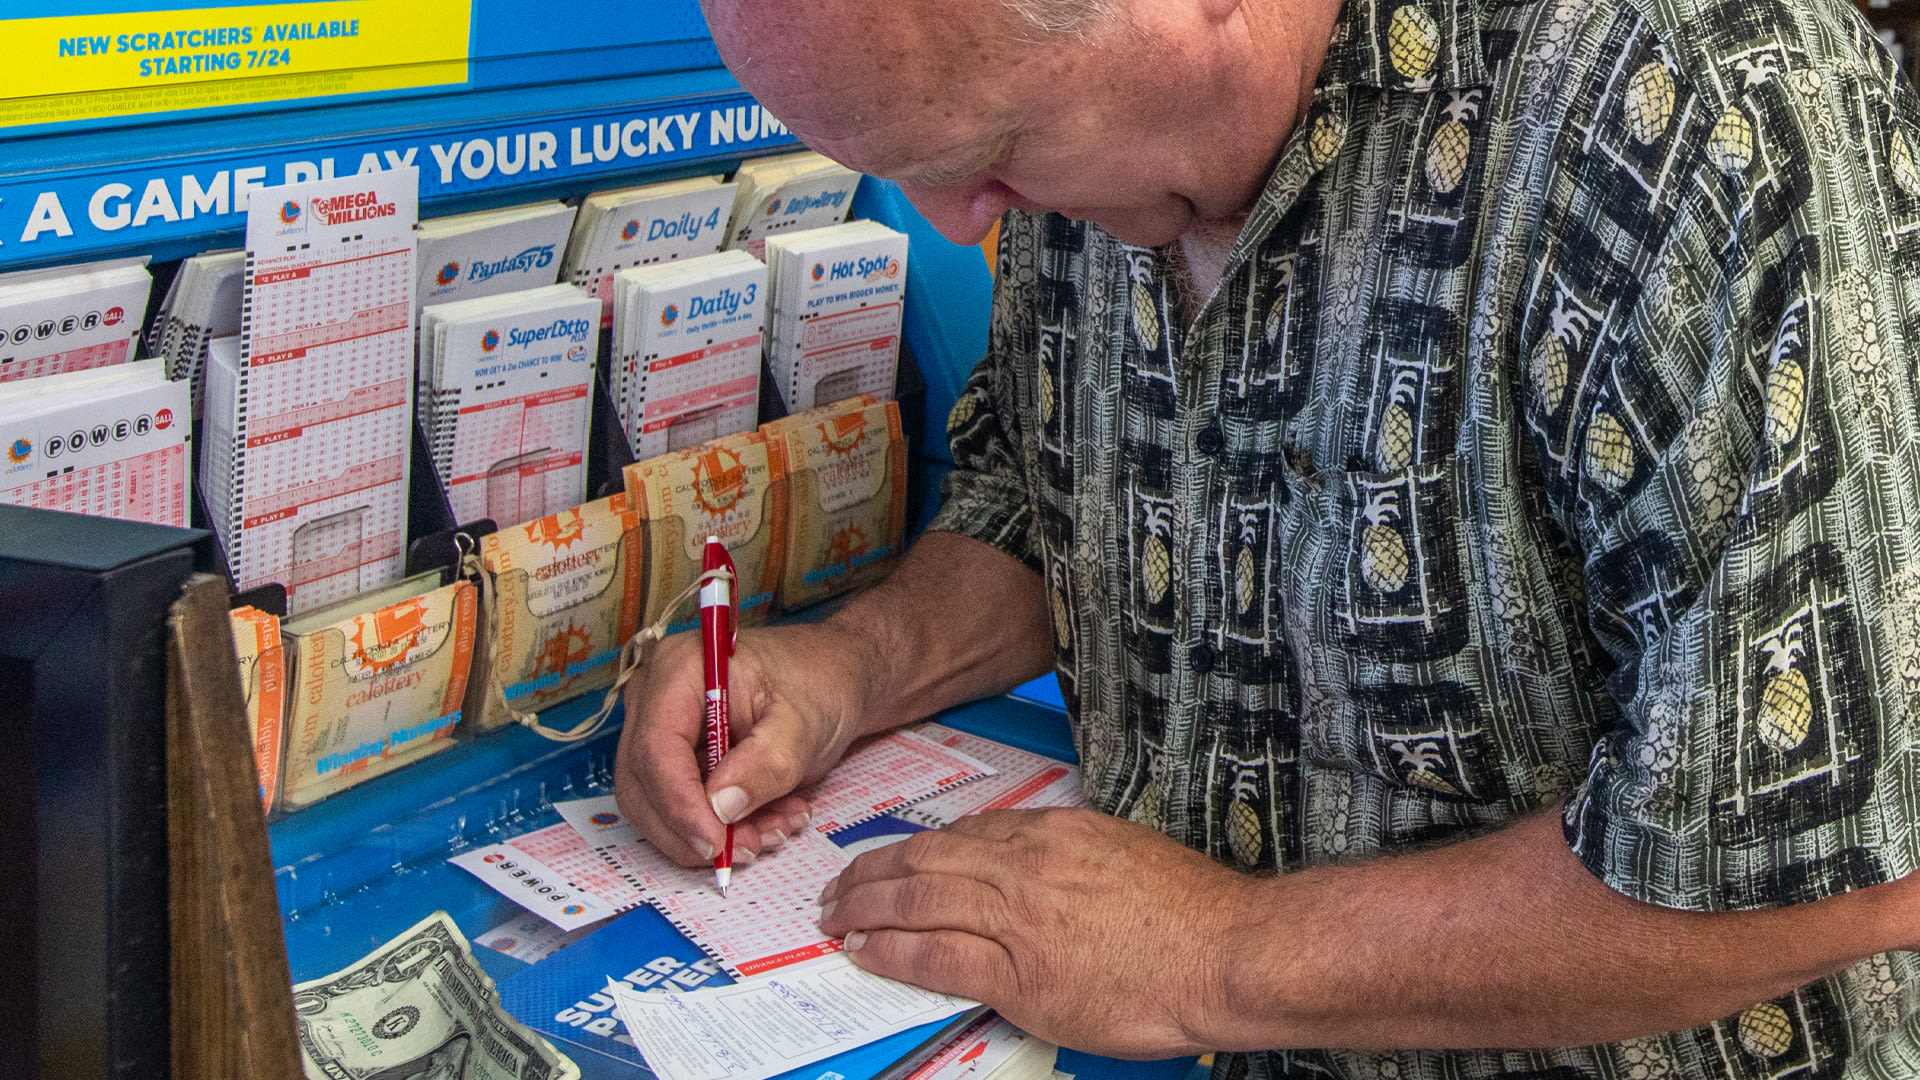 Lottery warning to check tickets for unclaimed $4 million lotto prize